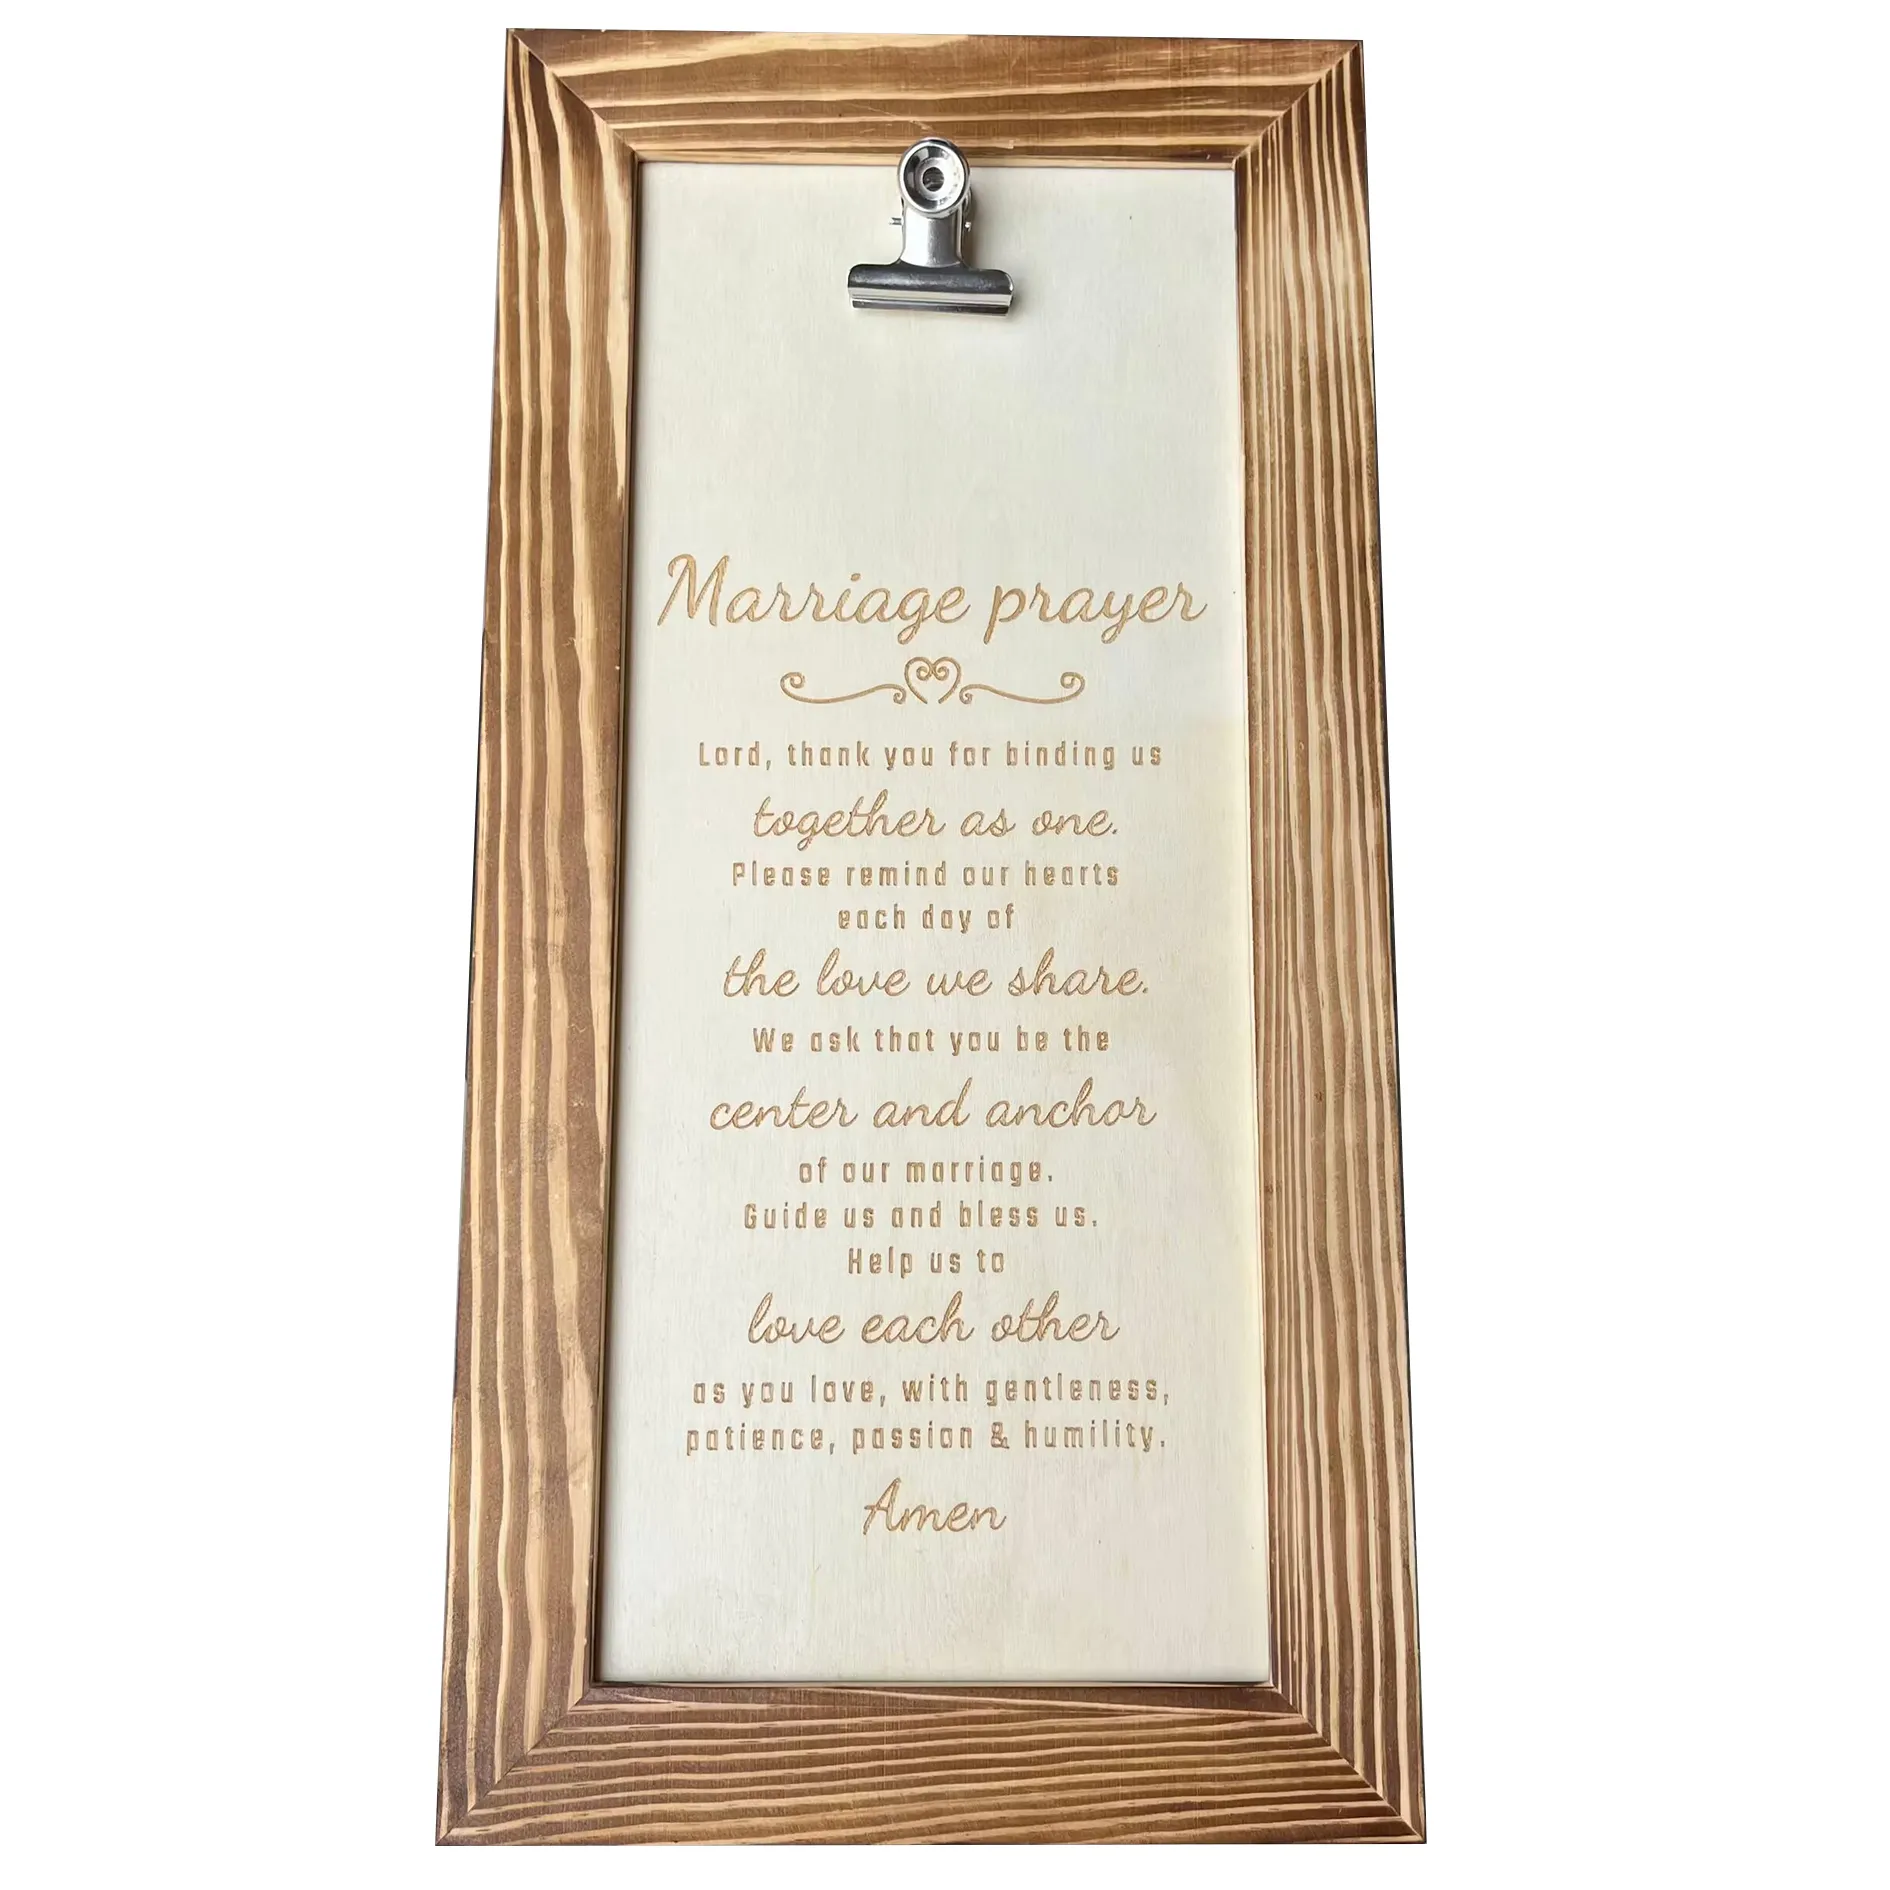 Custom Marriage Prayer Wall Decor - Classy Wedding Gift or Marriage Gifts, Ideal Anniversary or Bridal Shower Gift